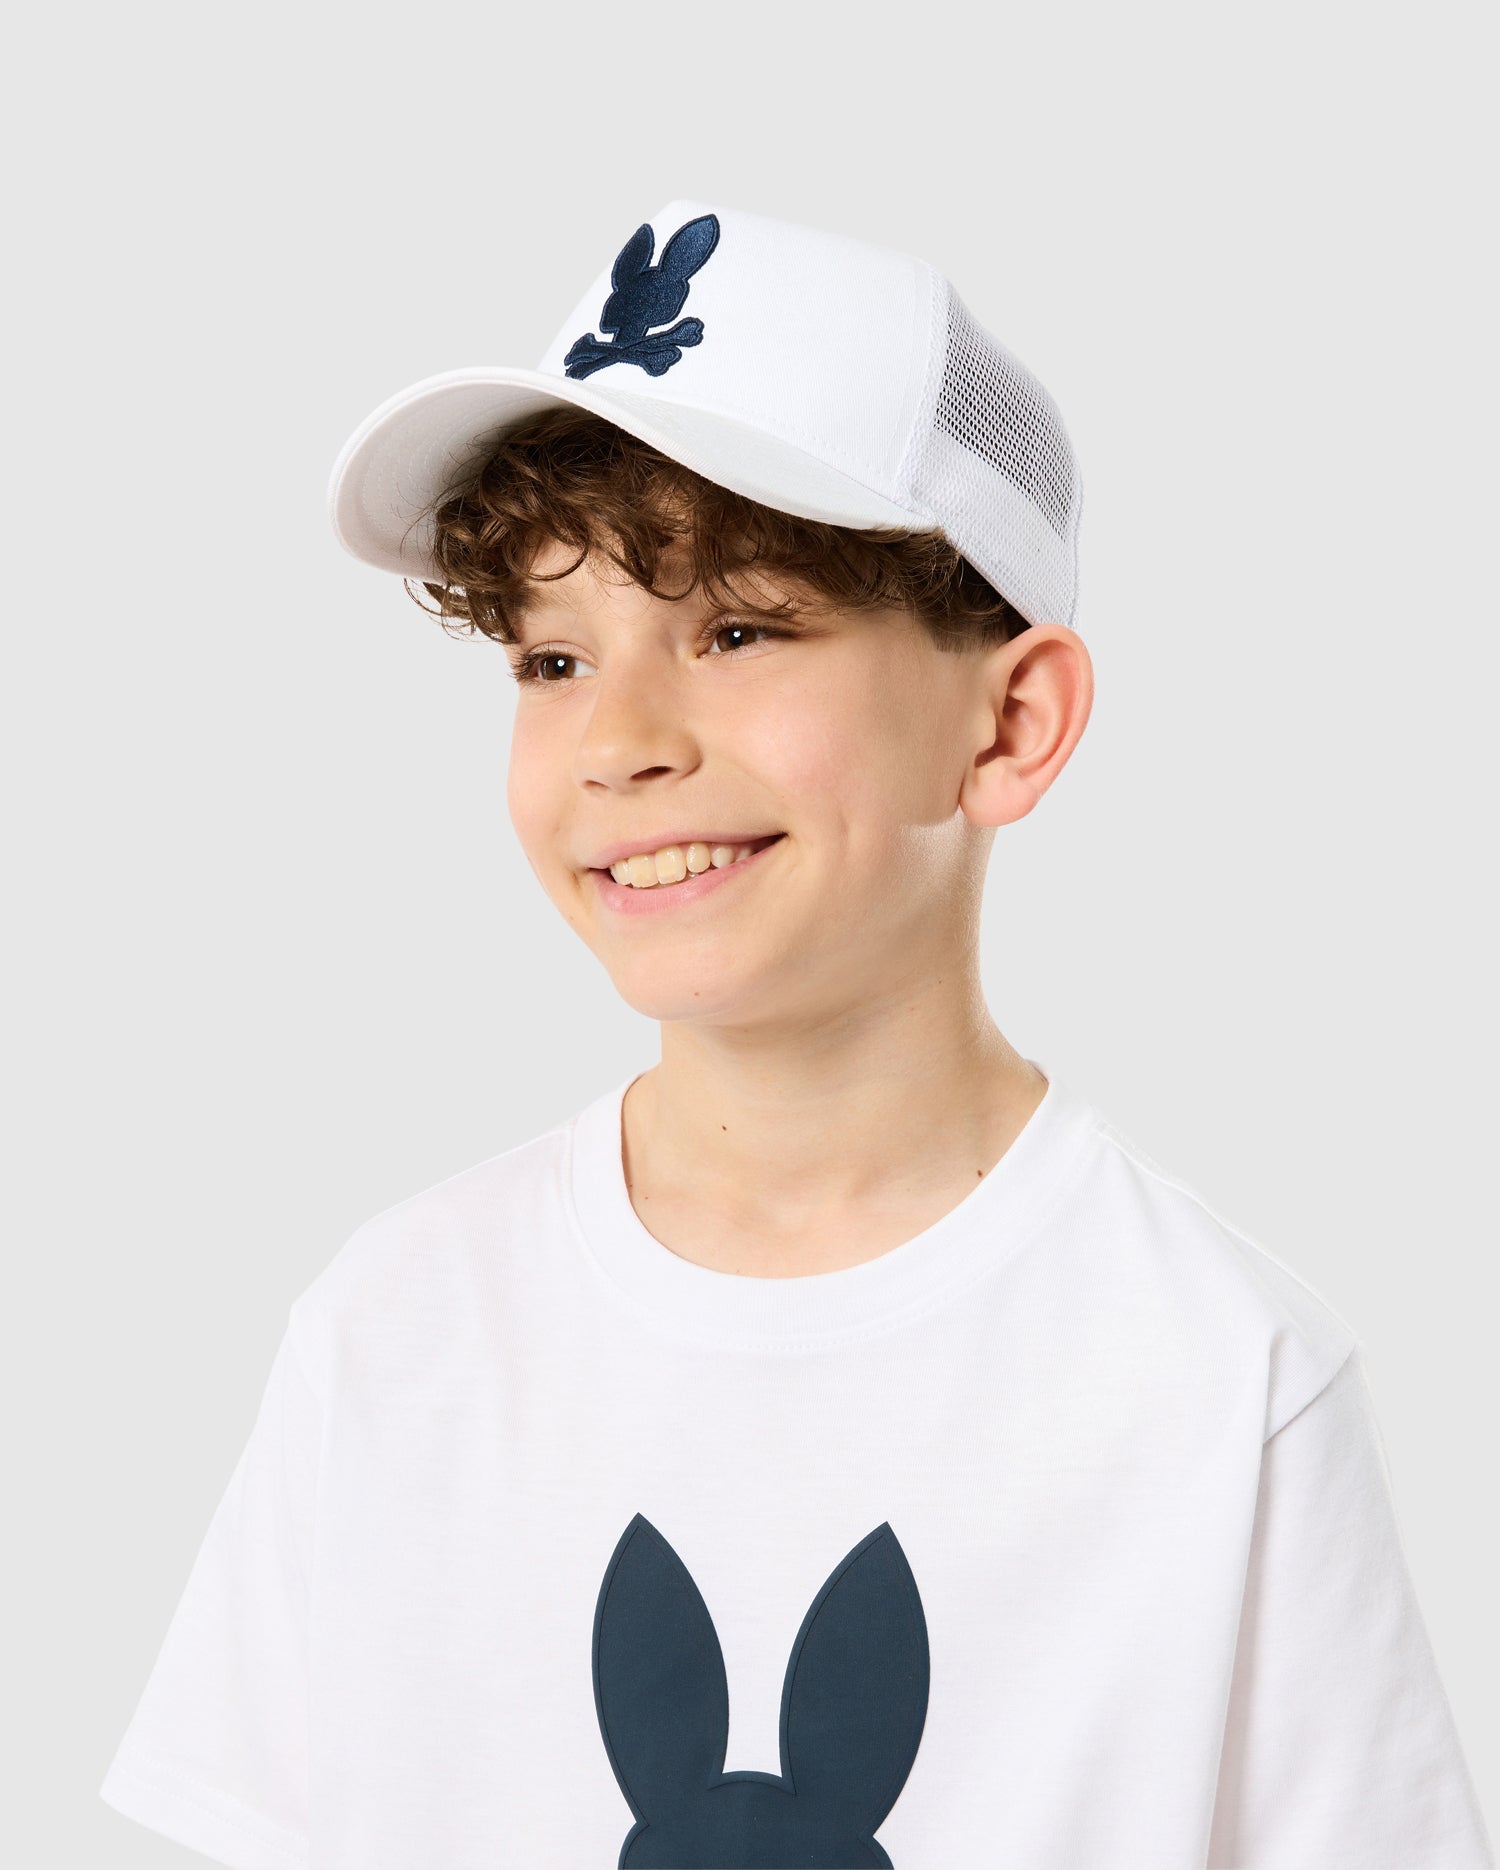 A young boy wearing a white Psycho Bunny Houston trucker cap with snapback fastening and t-shirt with a blue bunny design, smiling against a plain background. His curly hair peeks out from under the cap.